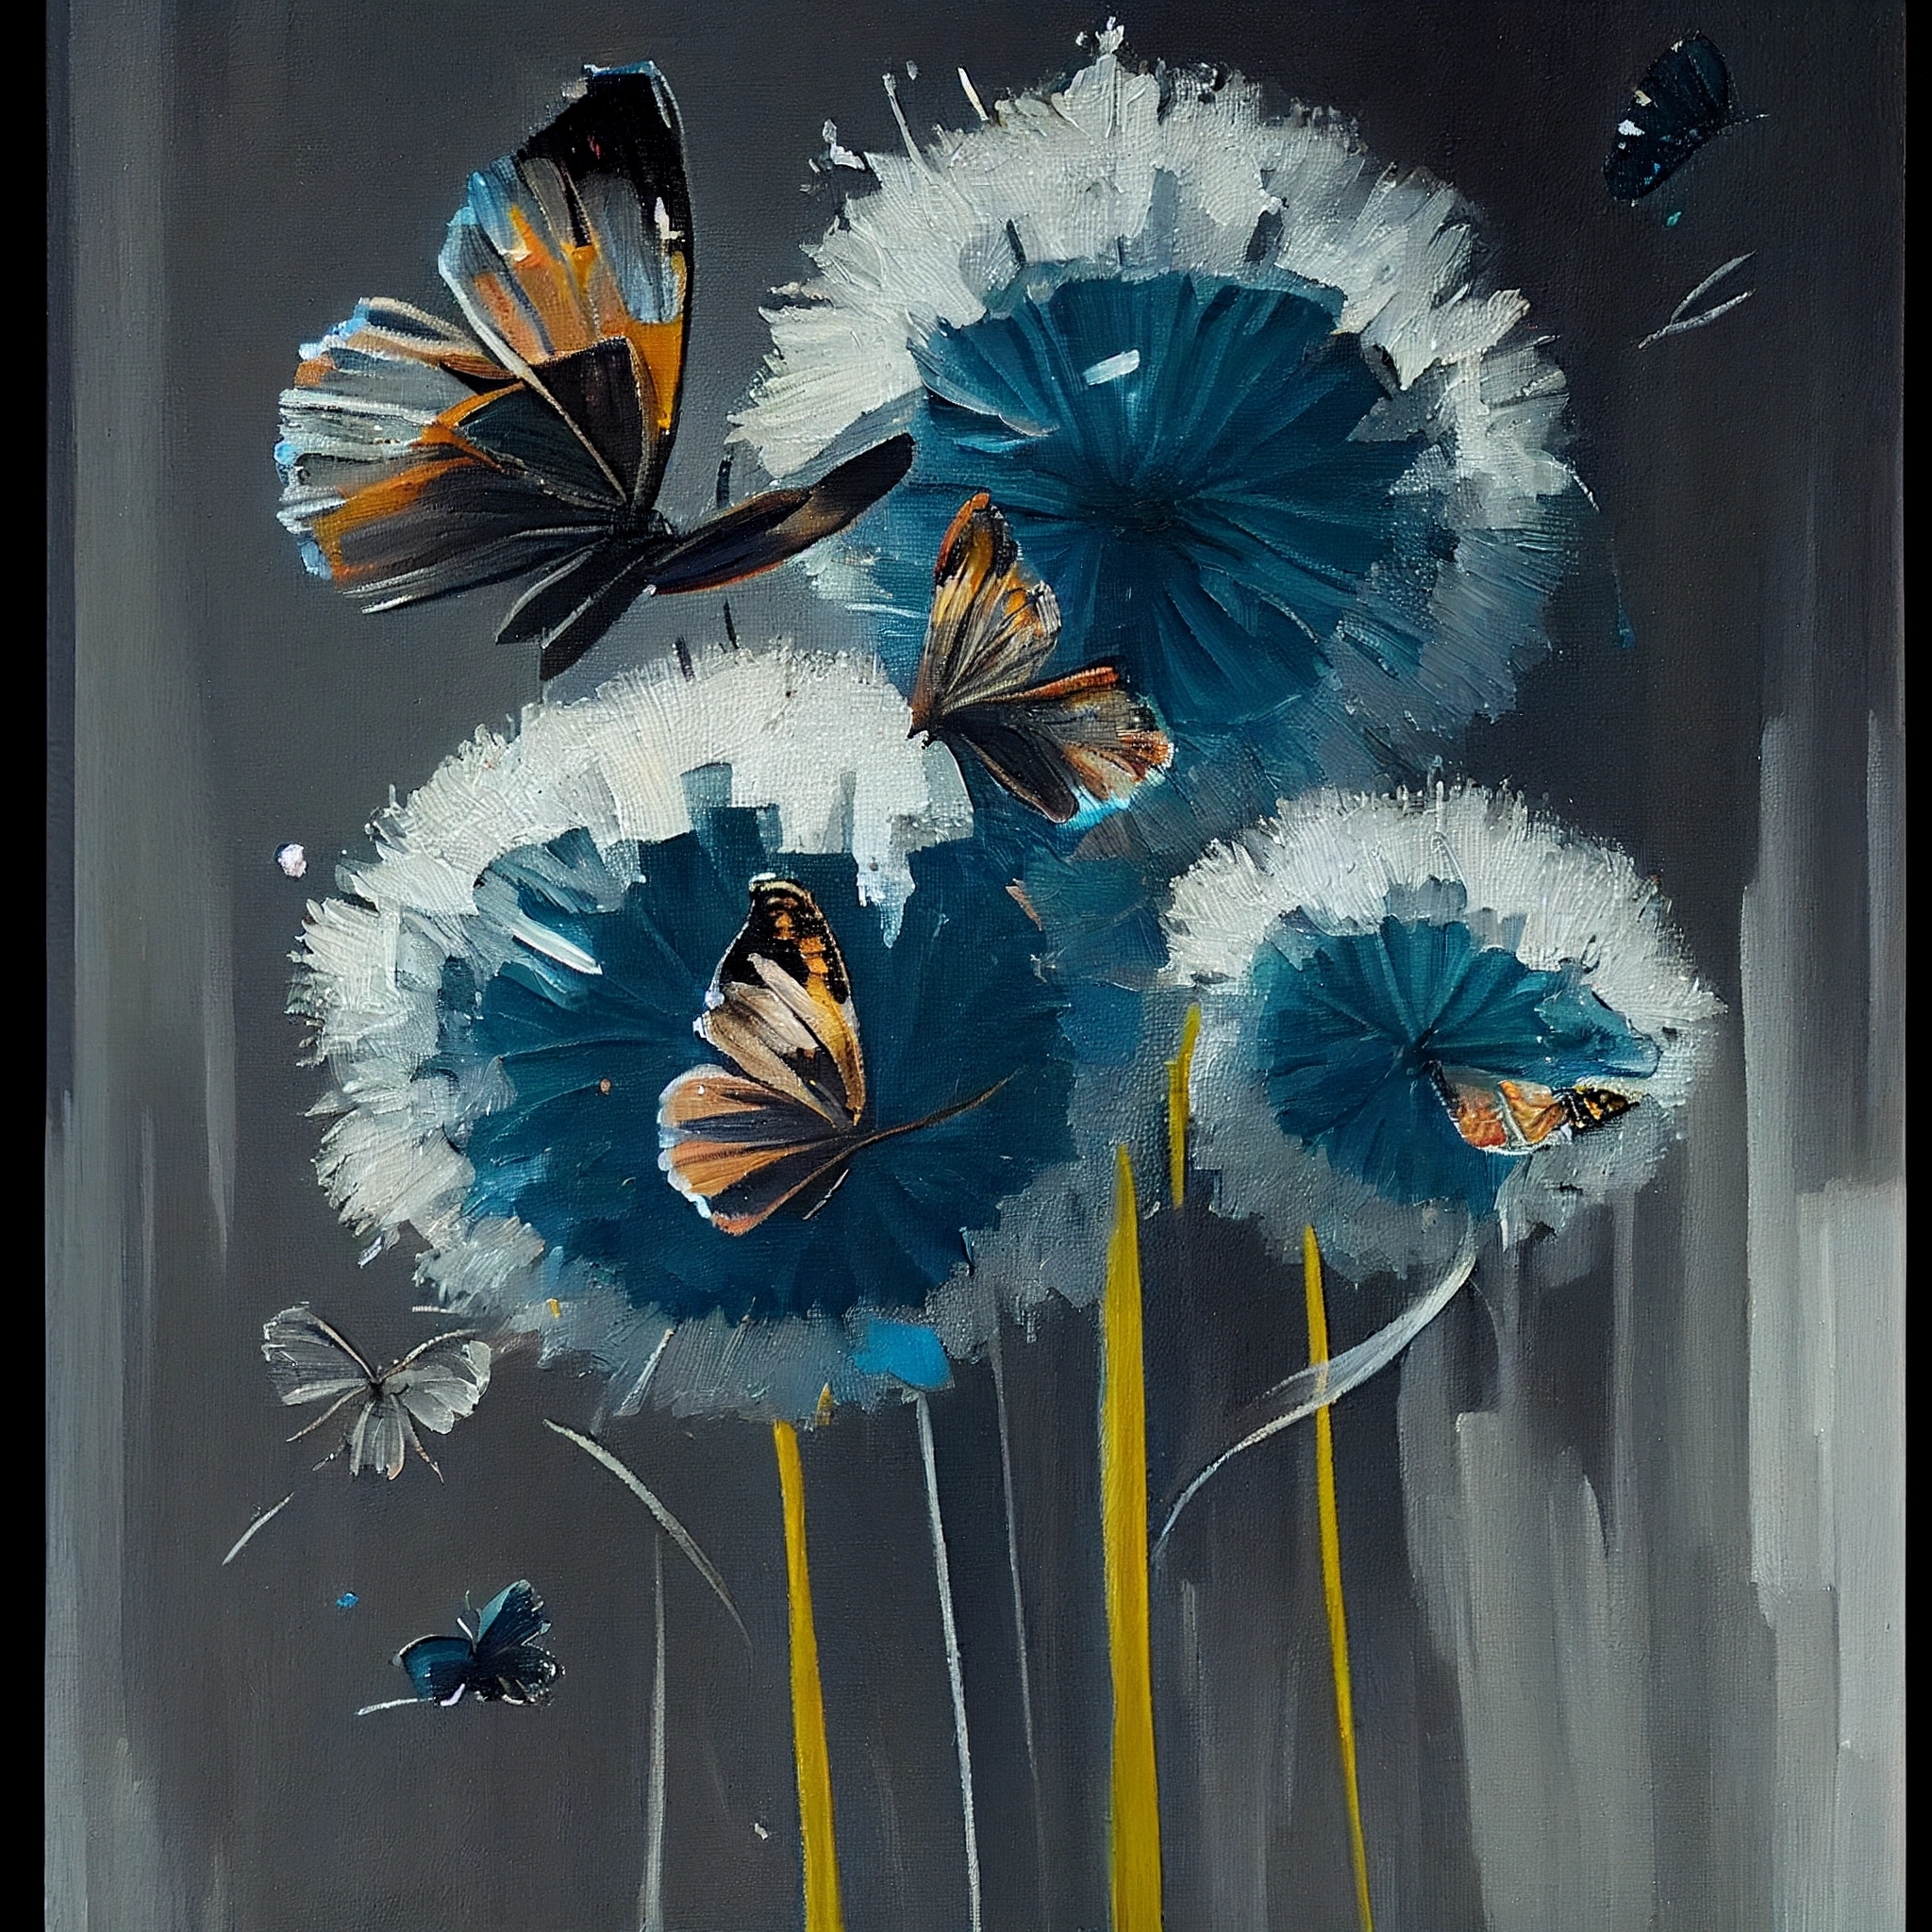 Fluttering Dreams: An Enchanting Oil Painting Print of Butterflies and Dandelions